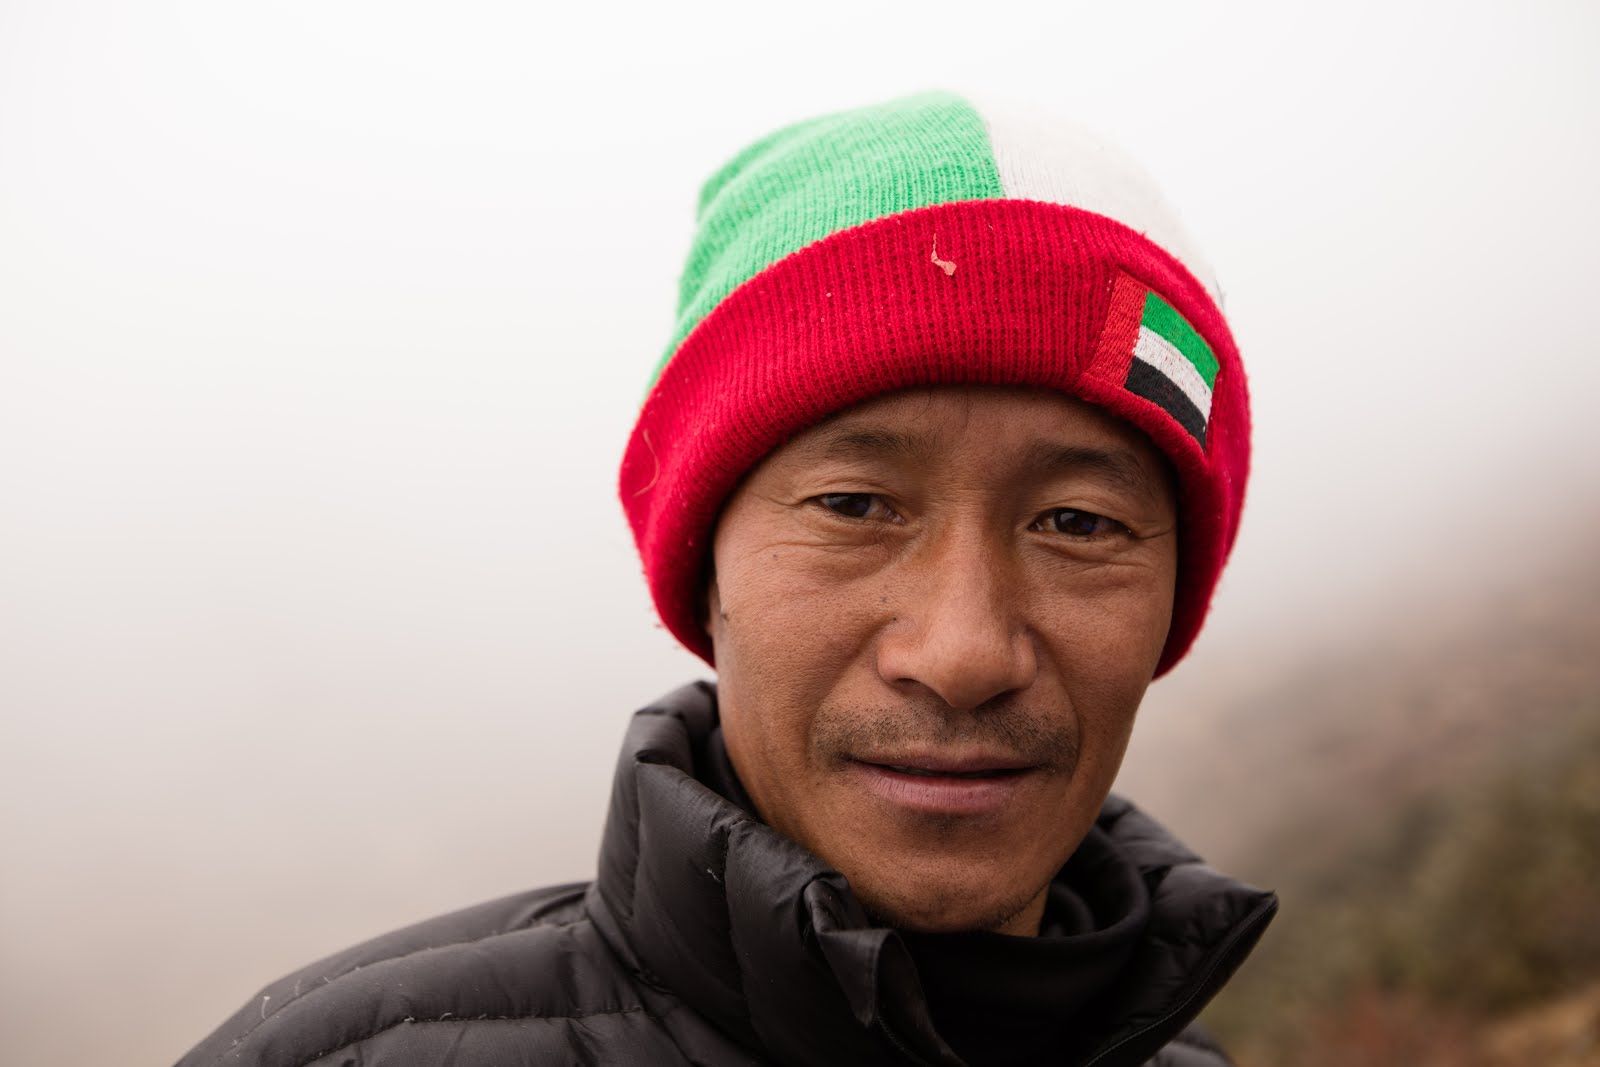 Jangbu Sherpa - Our chef on the journey. Amazing what this guy can do with portable food and kerosene burners. Yum!